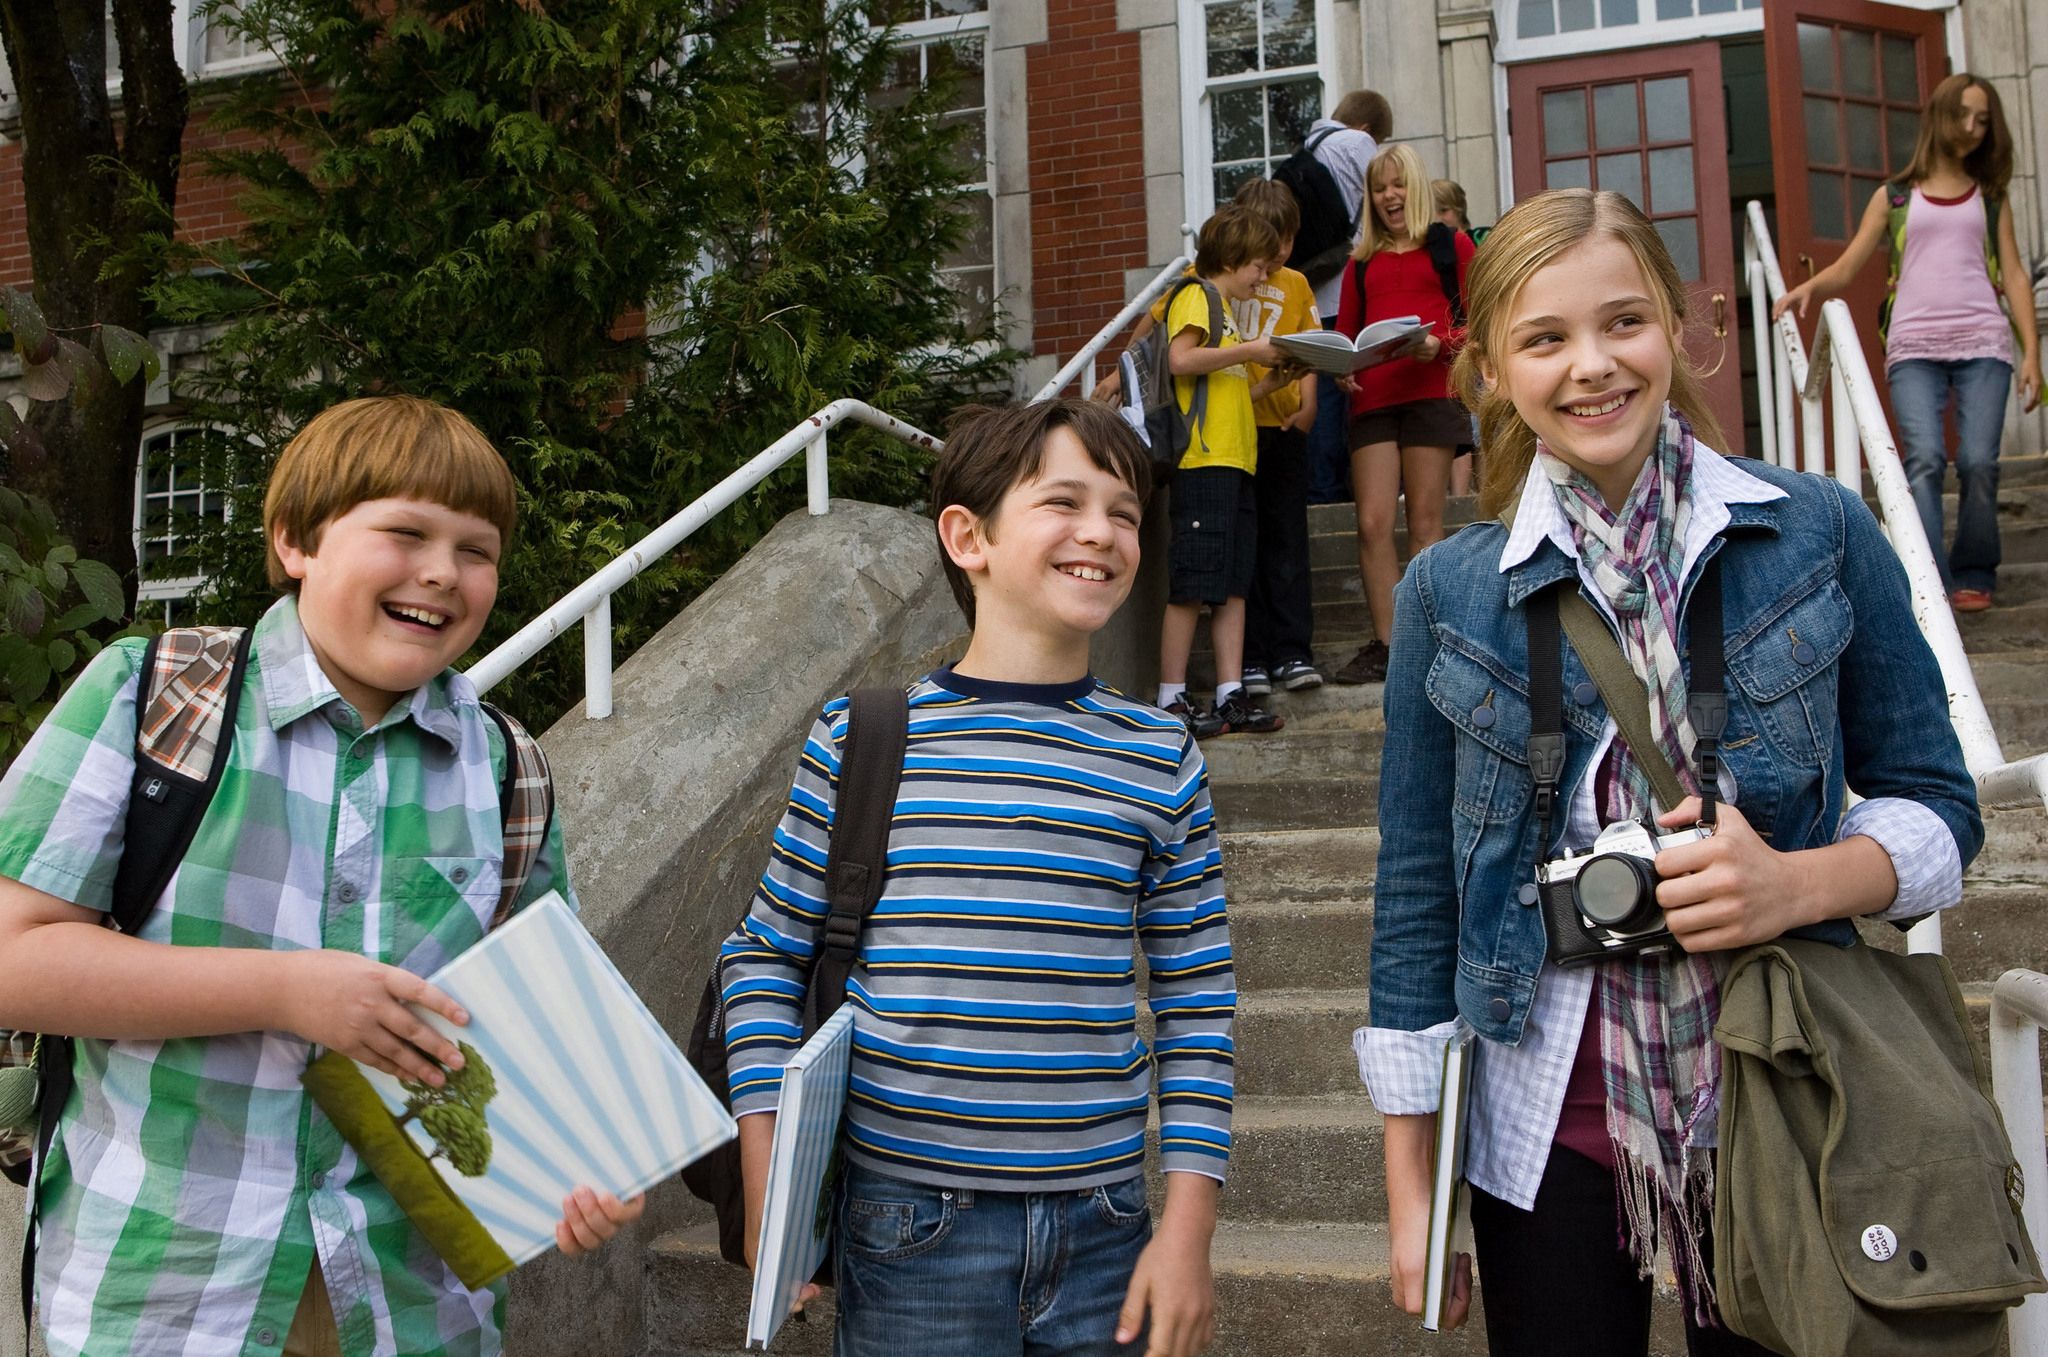 Chloë Grace Moretz in Diary of a Wimpy Kid